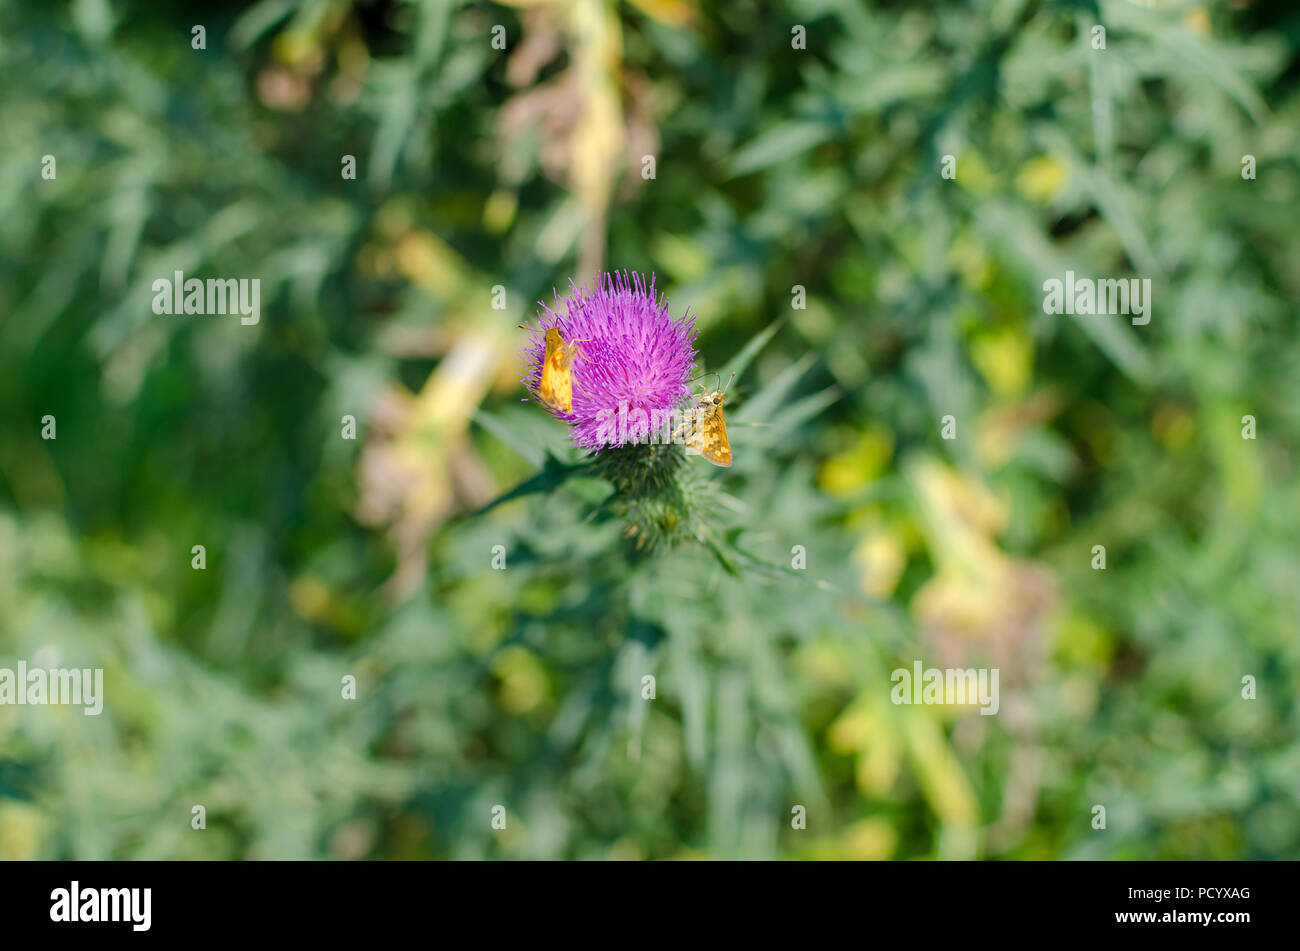 Two Small Yellow Butterflys Drinking Nectar from a Pink Thistle Flower in Pittsburgh's Riverview Park Stock Photo